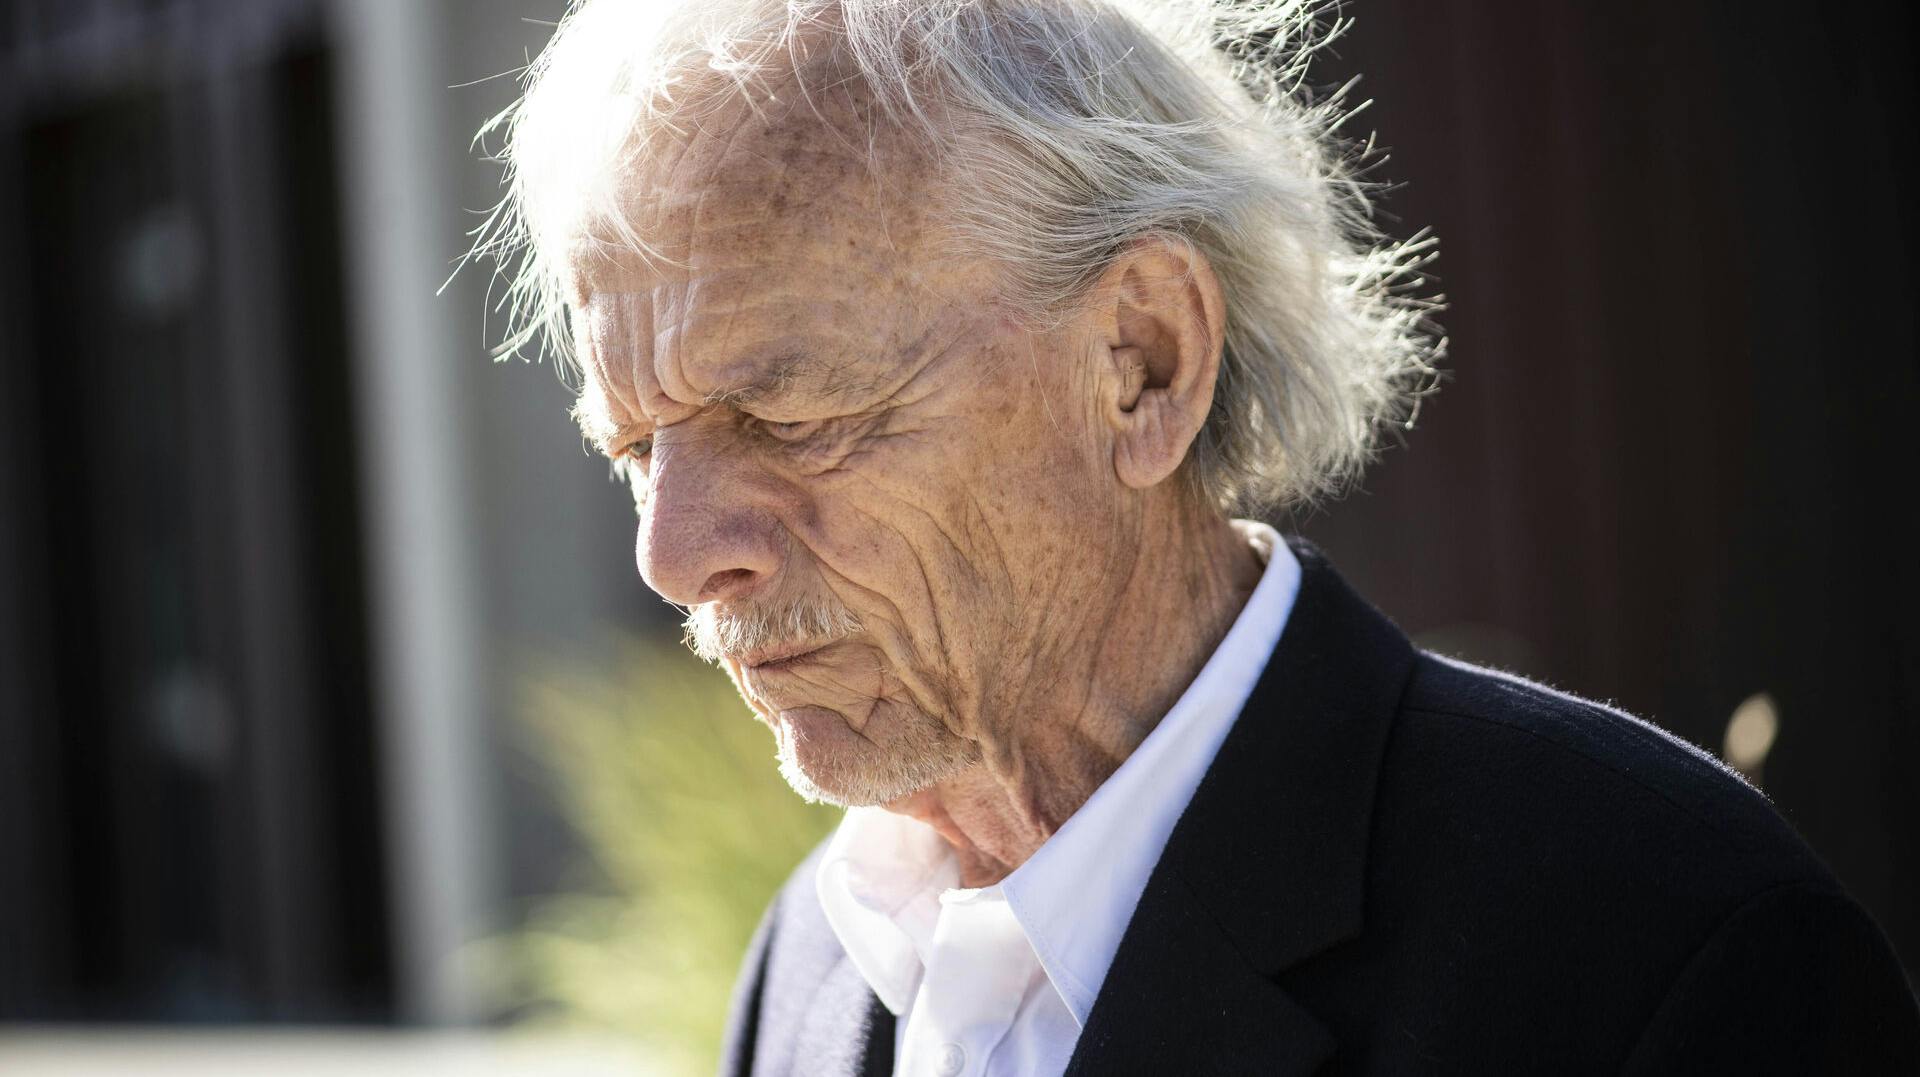 Svend Lings arrives, Demonstration supports suicide doctor Svend Lings in front of the district court in Svendborg, Wednesday 28 June 2023. Svend Lings is accused of having helped a person commit suicide. (Photo: Tim Kildeborg Jensen/Ritzau Scanpix)